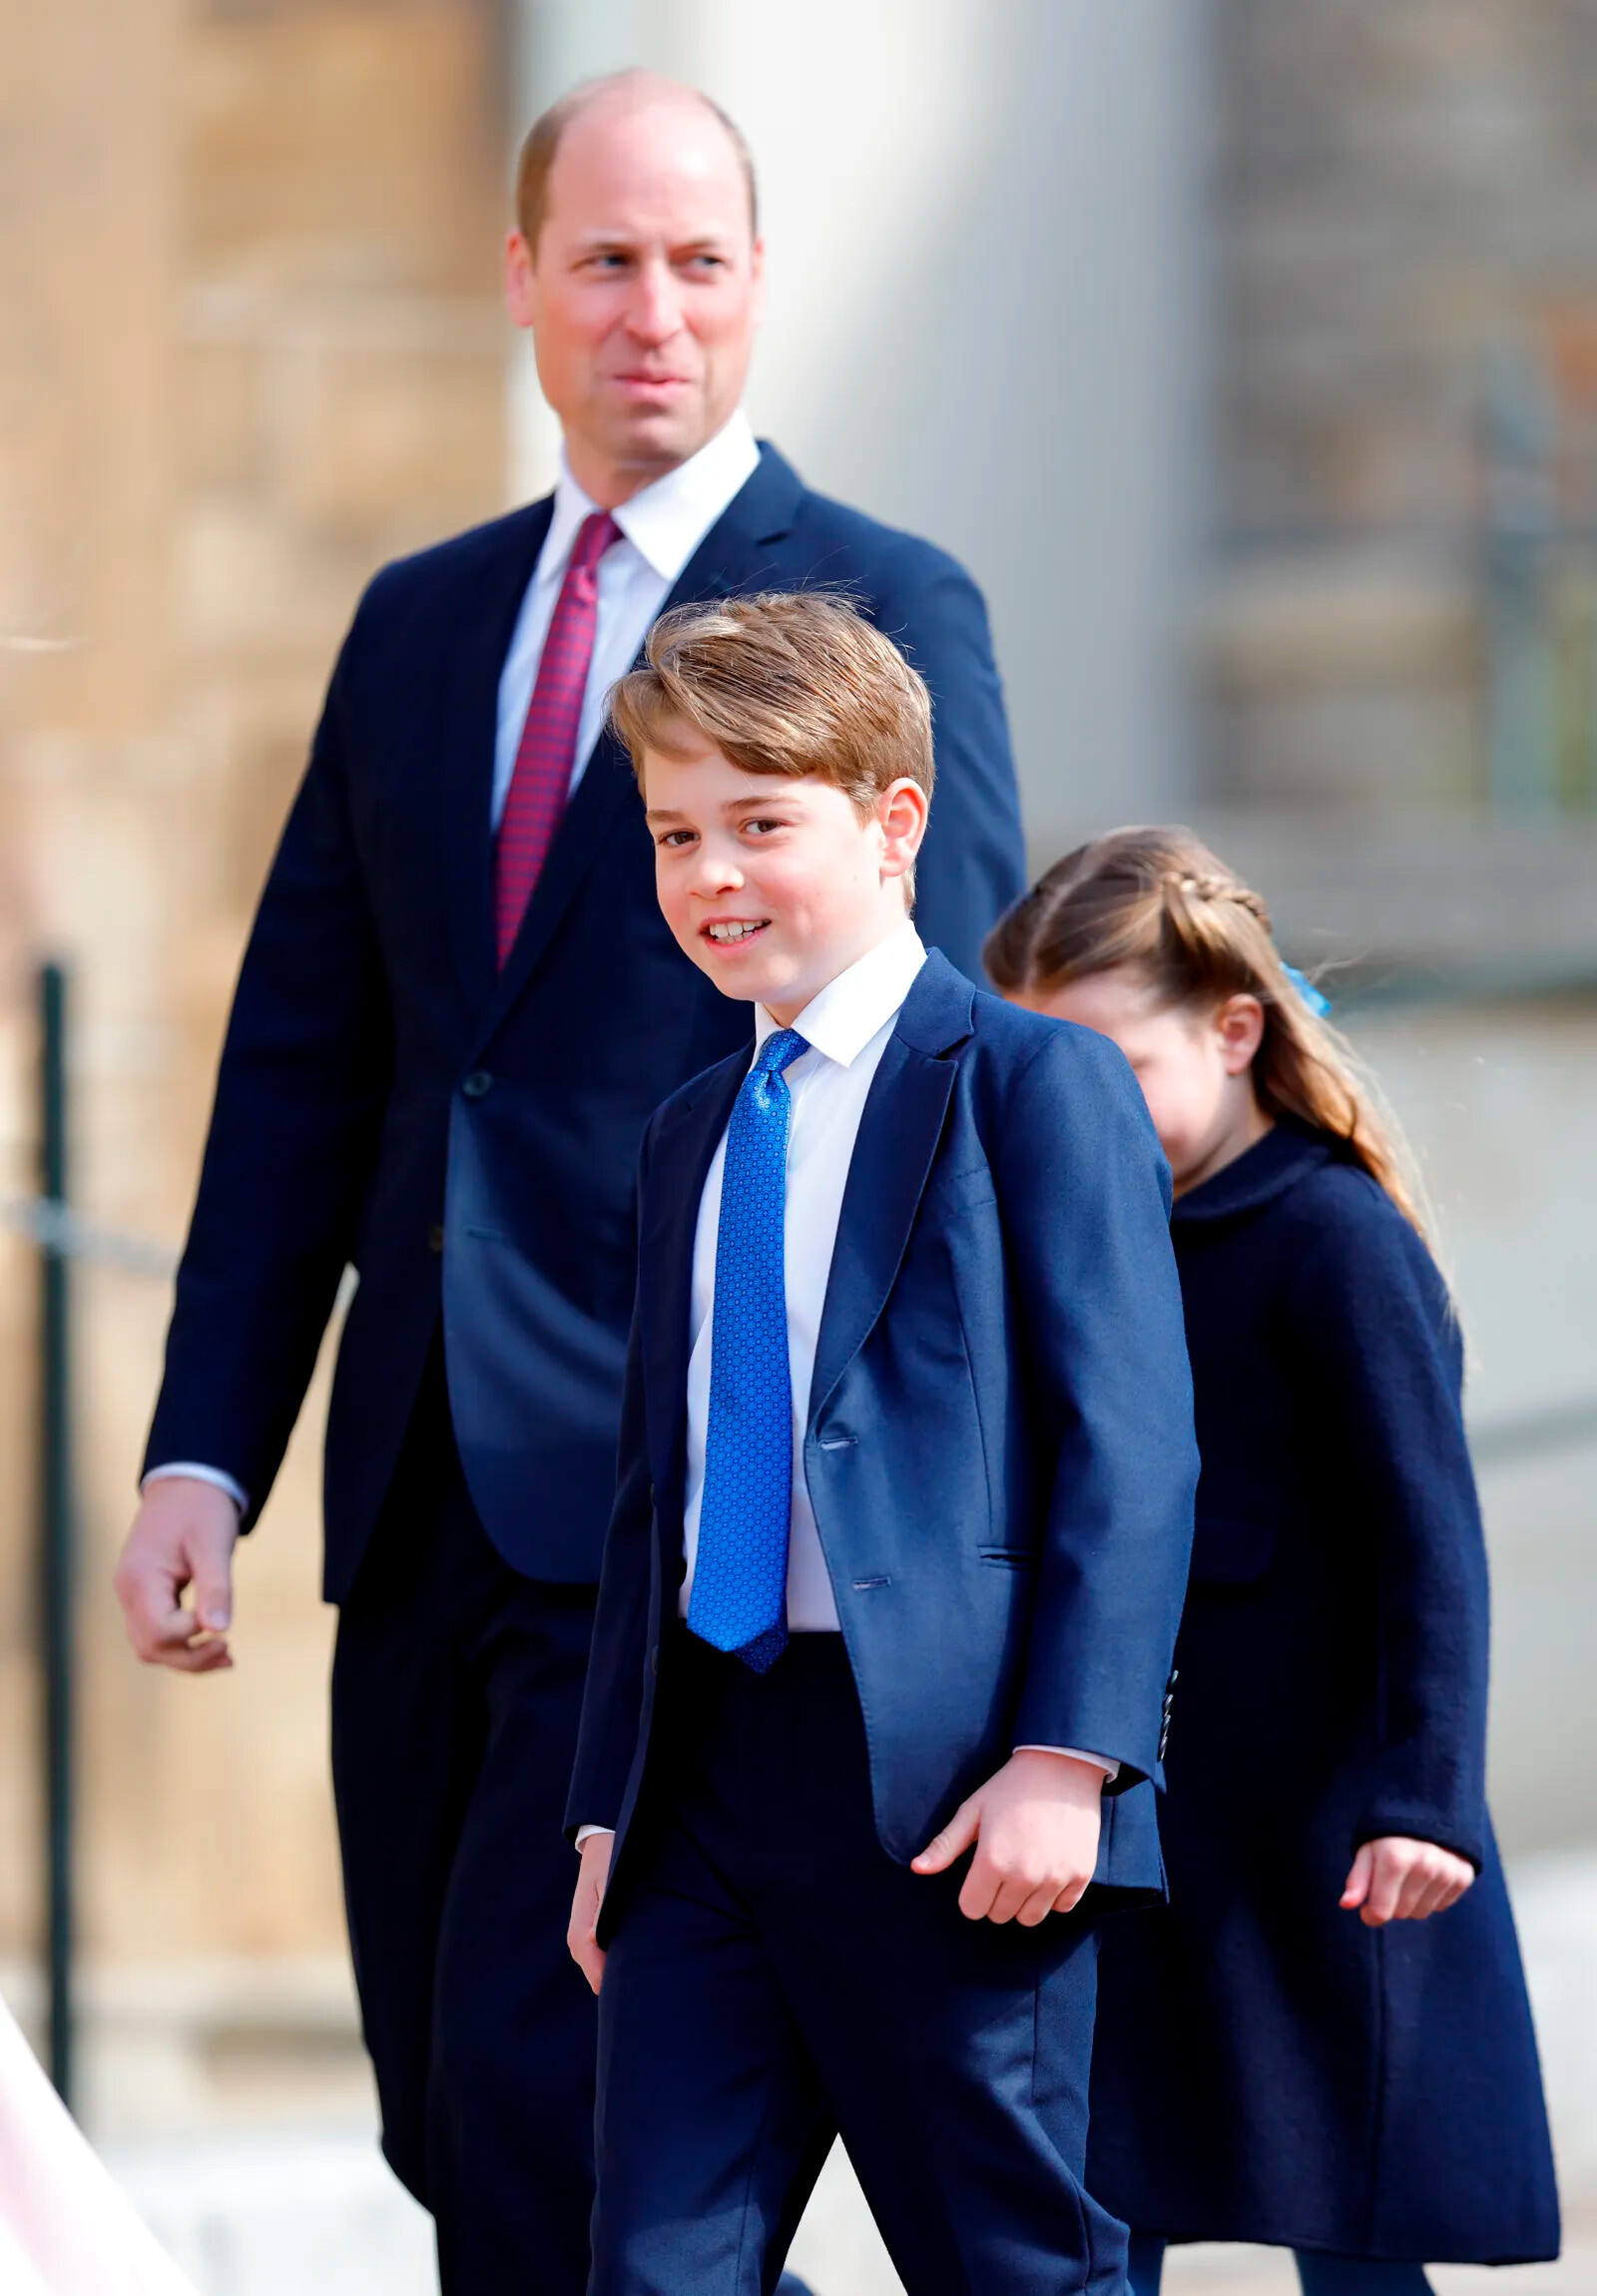 Prince-George-was-absent-from-opening-of-Parliament-02-Mainstyle.jpg